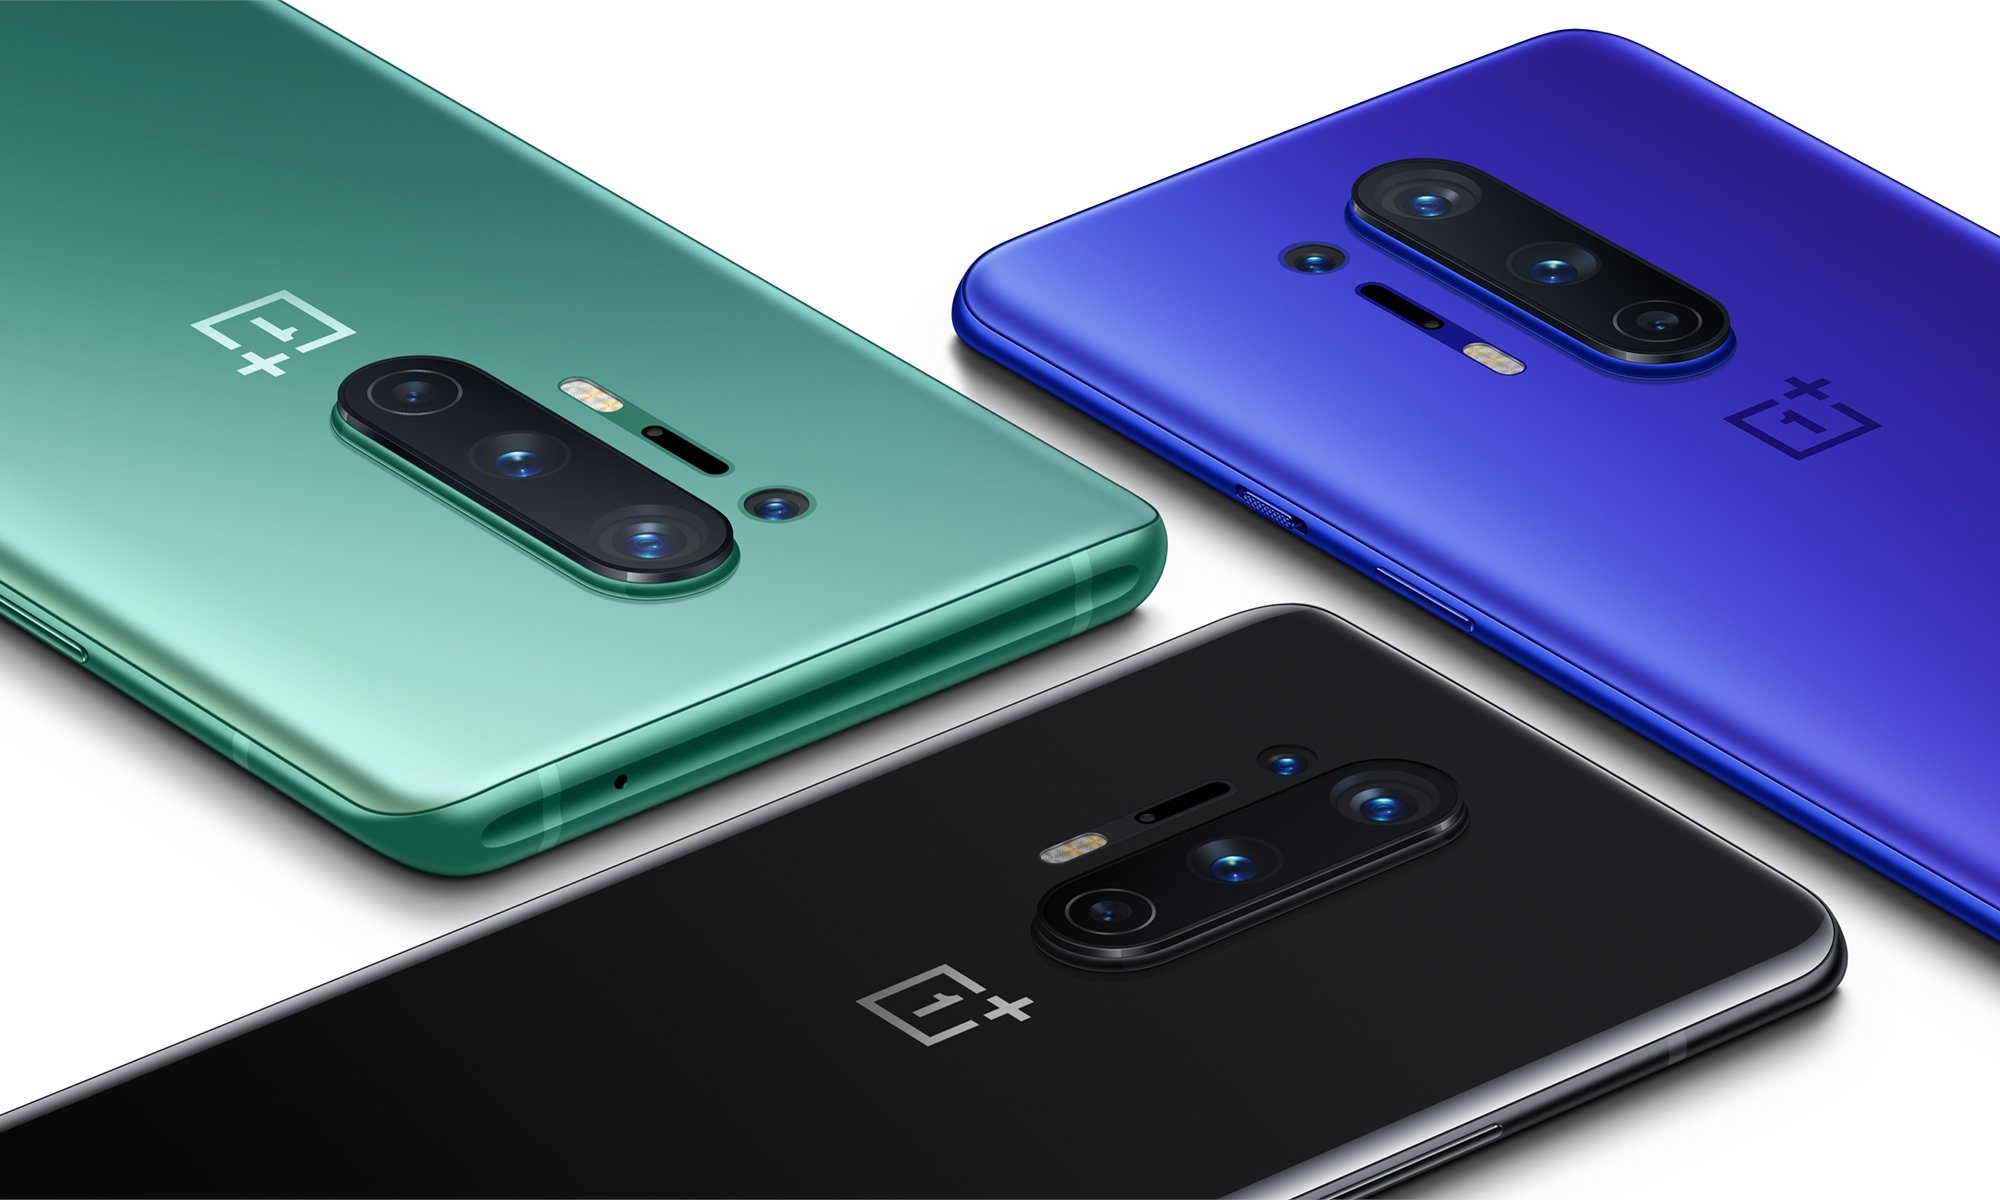 OnePlus 8 and OnePlus 8 Pro have started receiving OxygenOS 13.1.0.587, this is the latest update for the smartphones